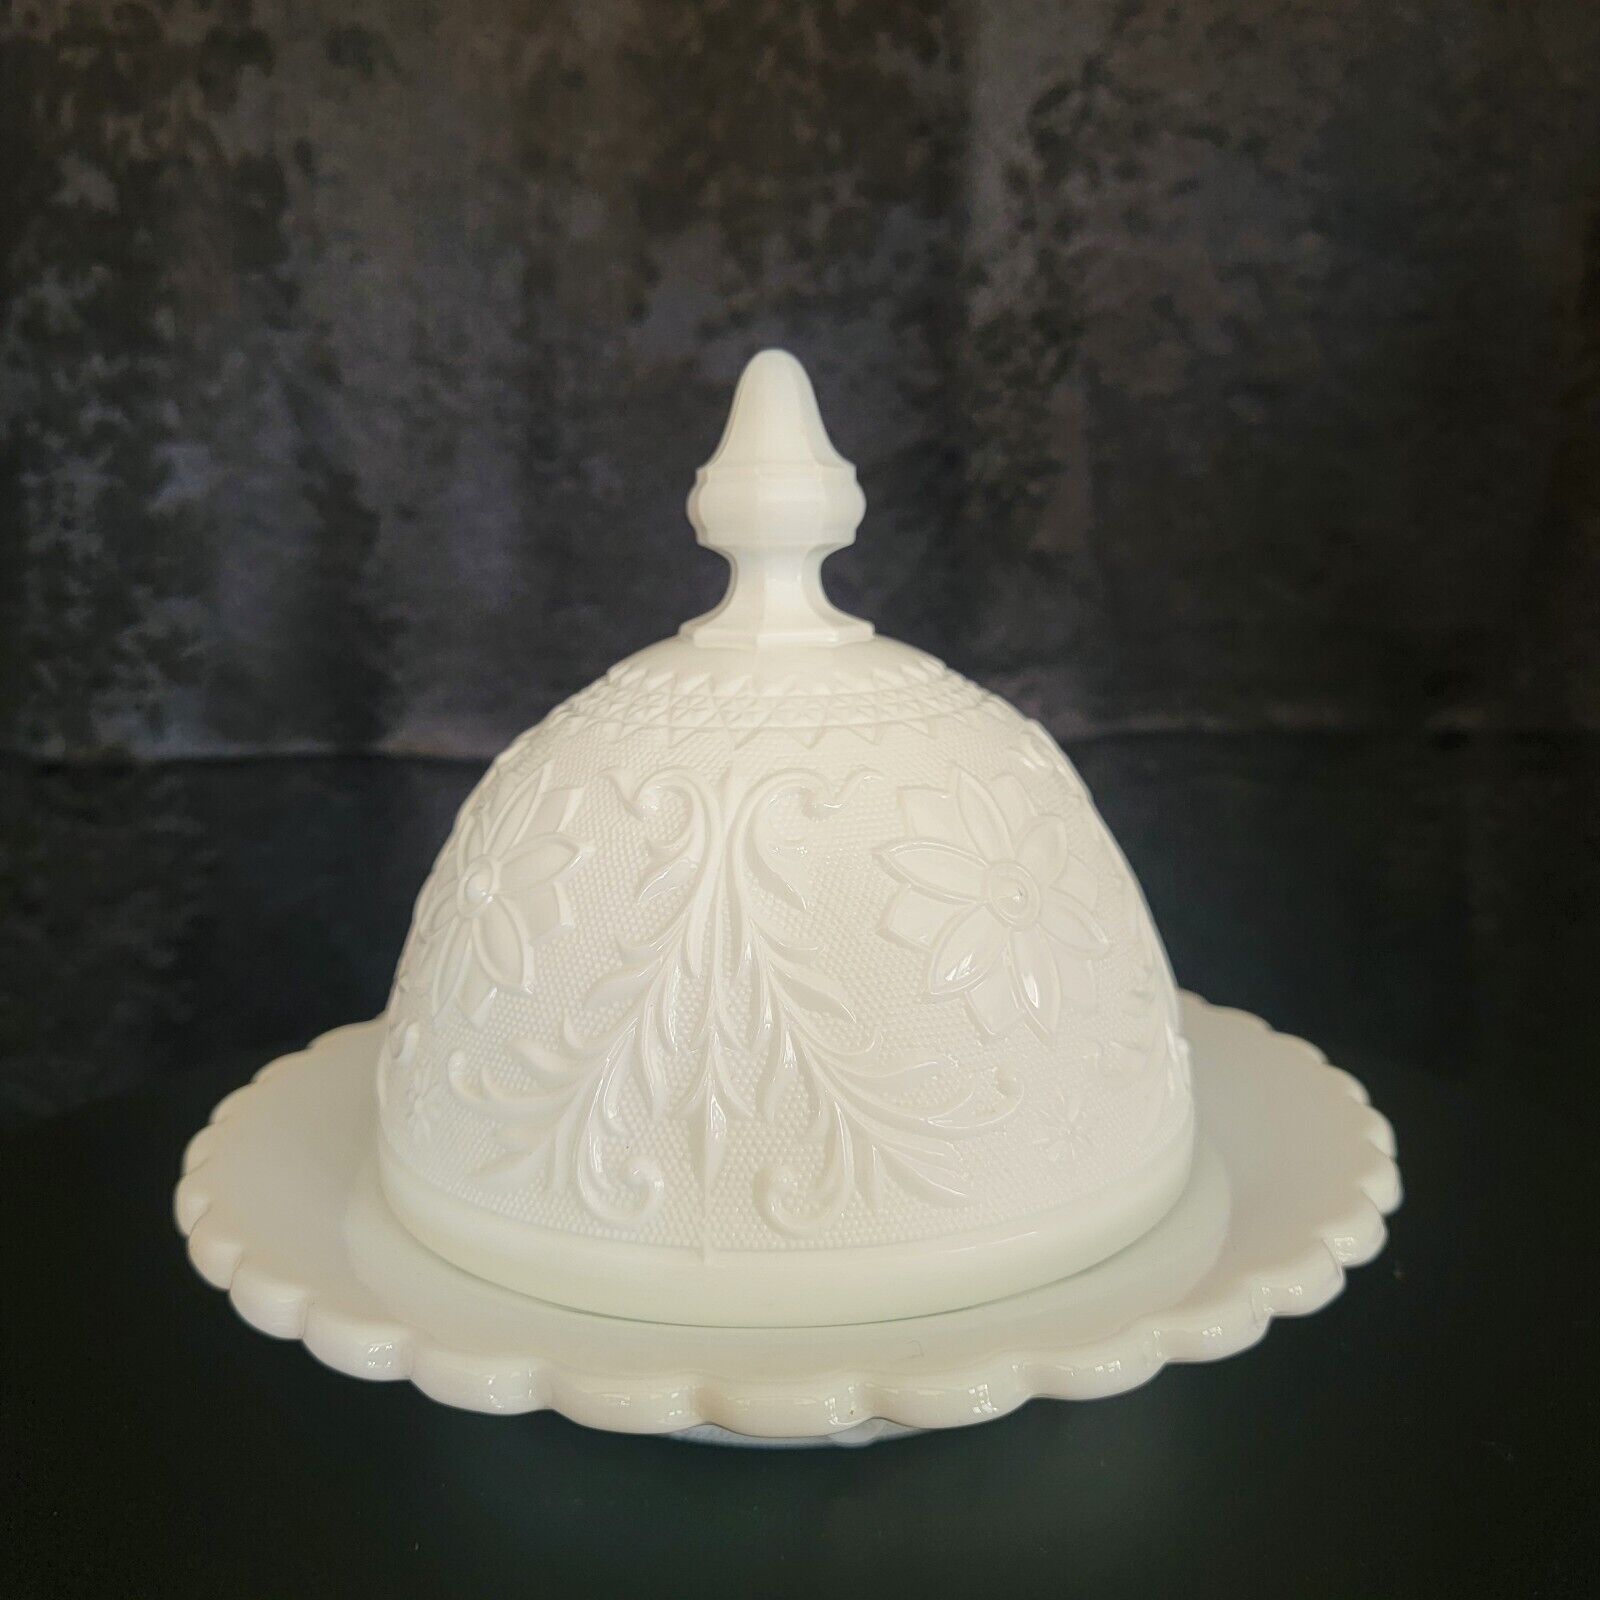 VTG Indiana Milk Glass Sandwich Tiara Covered Dome Serving/ Butter Dish